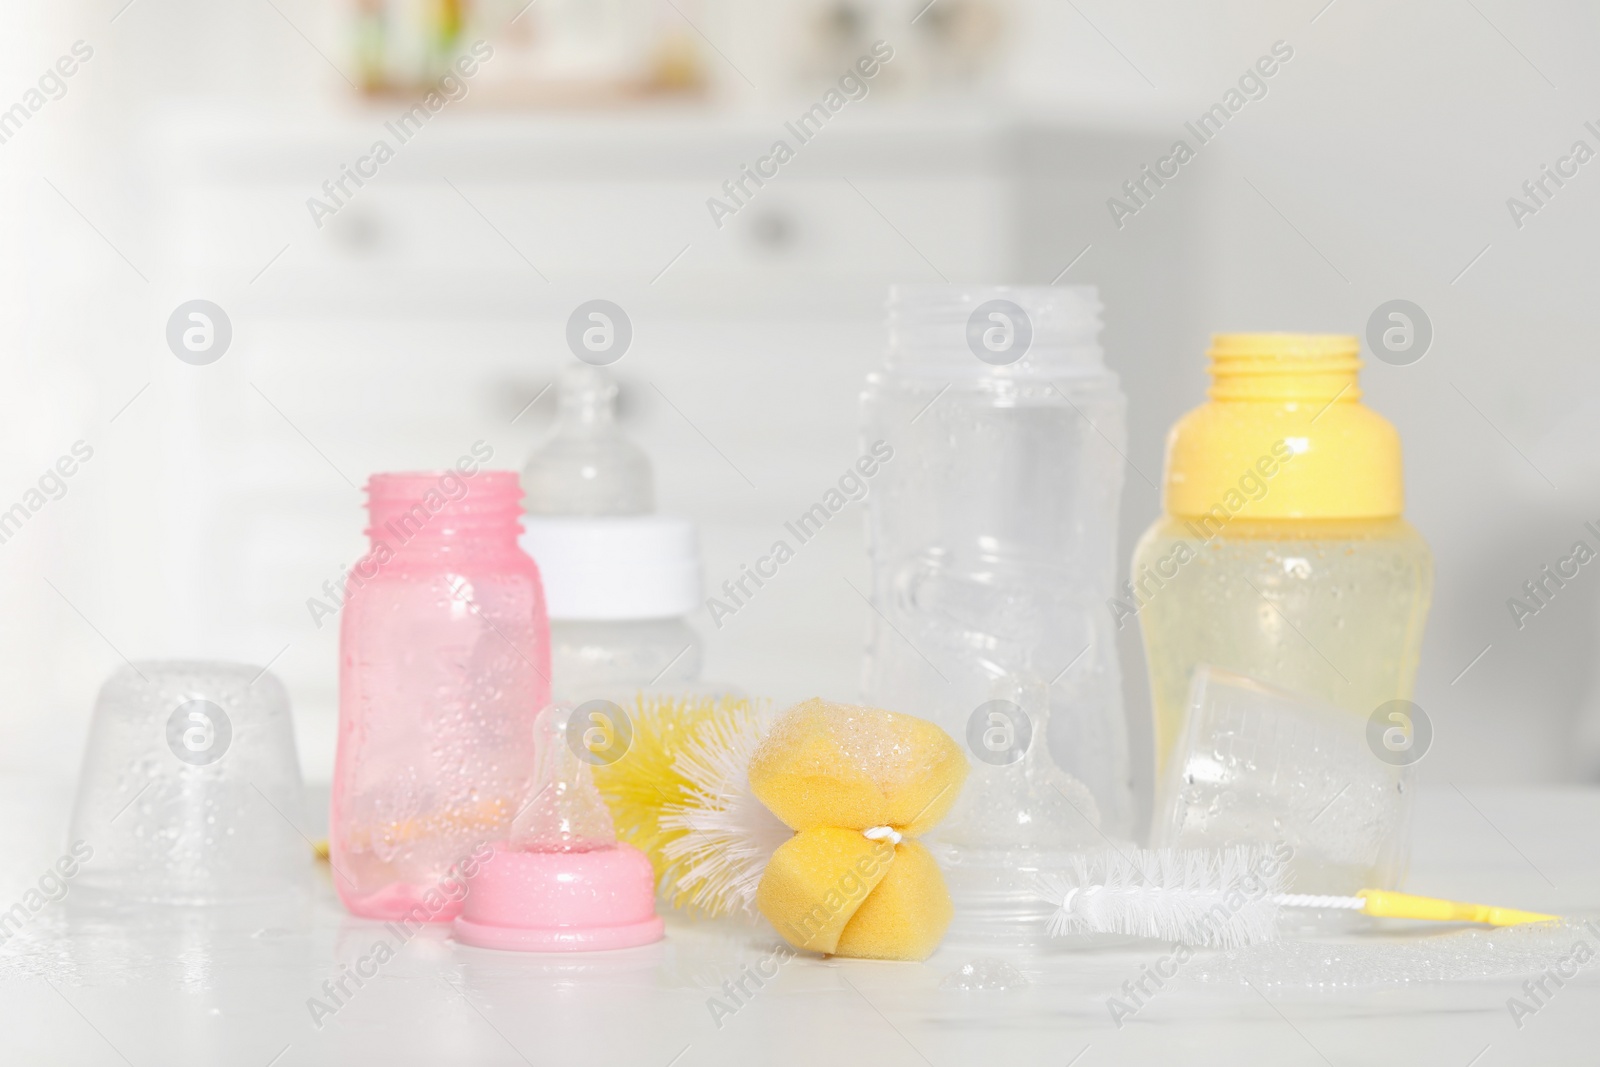 Photo of Clean baby bottles with nipples after sterilization and cleaning tools on white table indoors